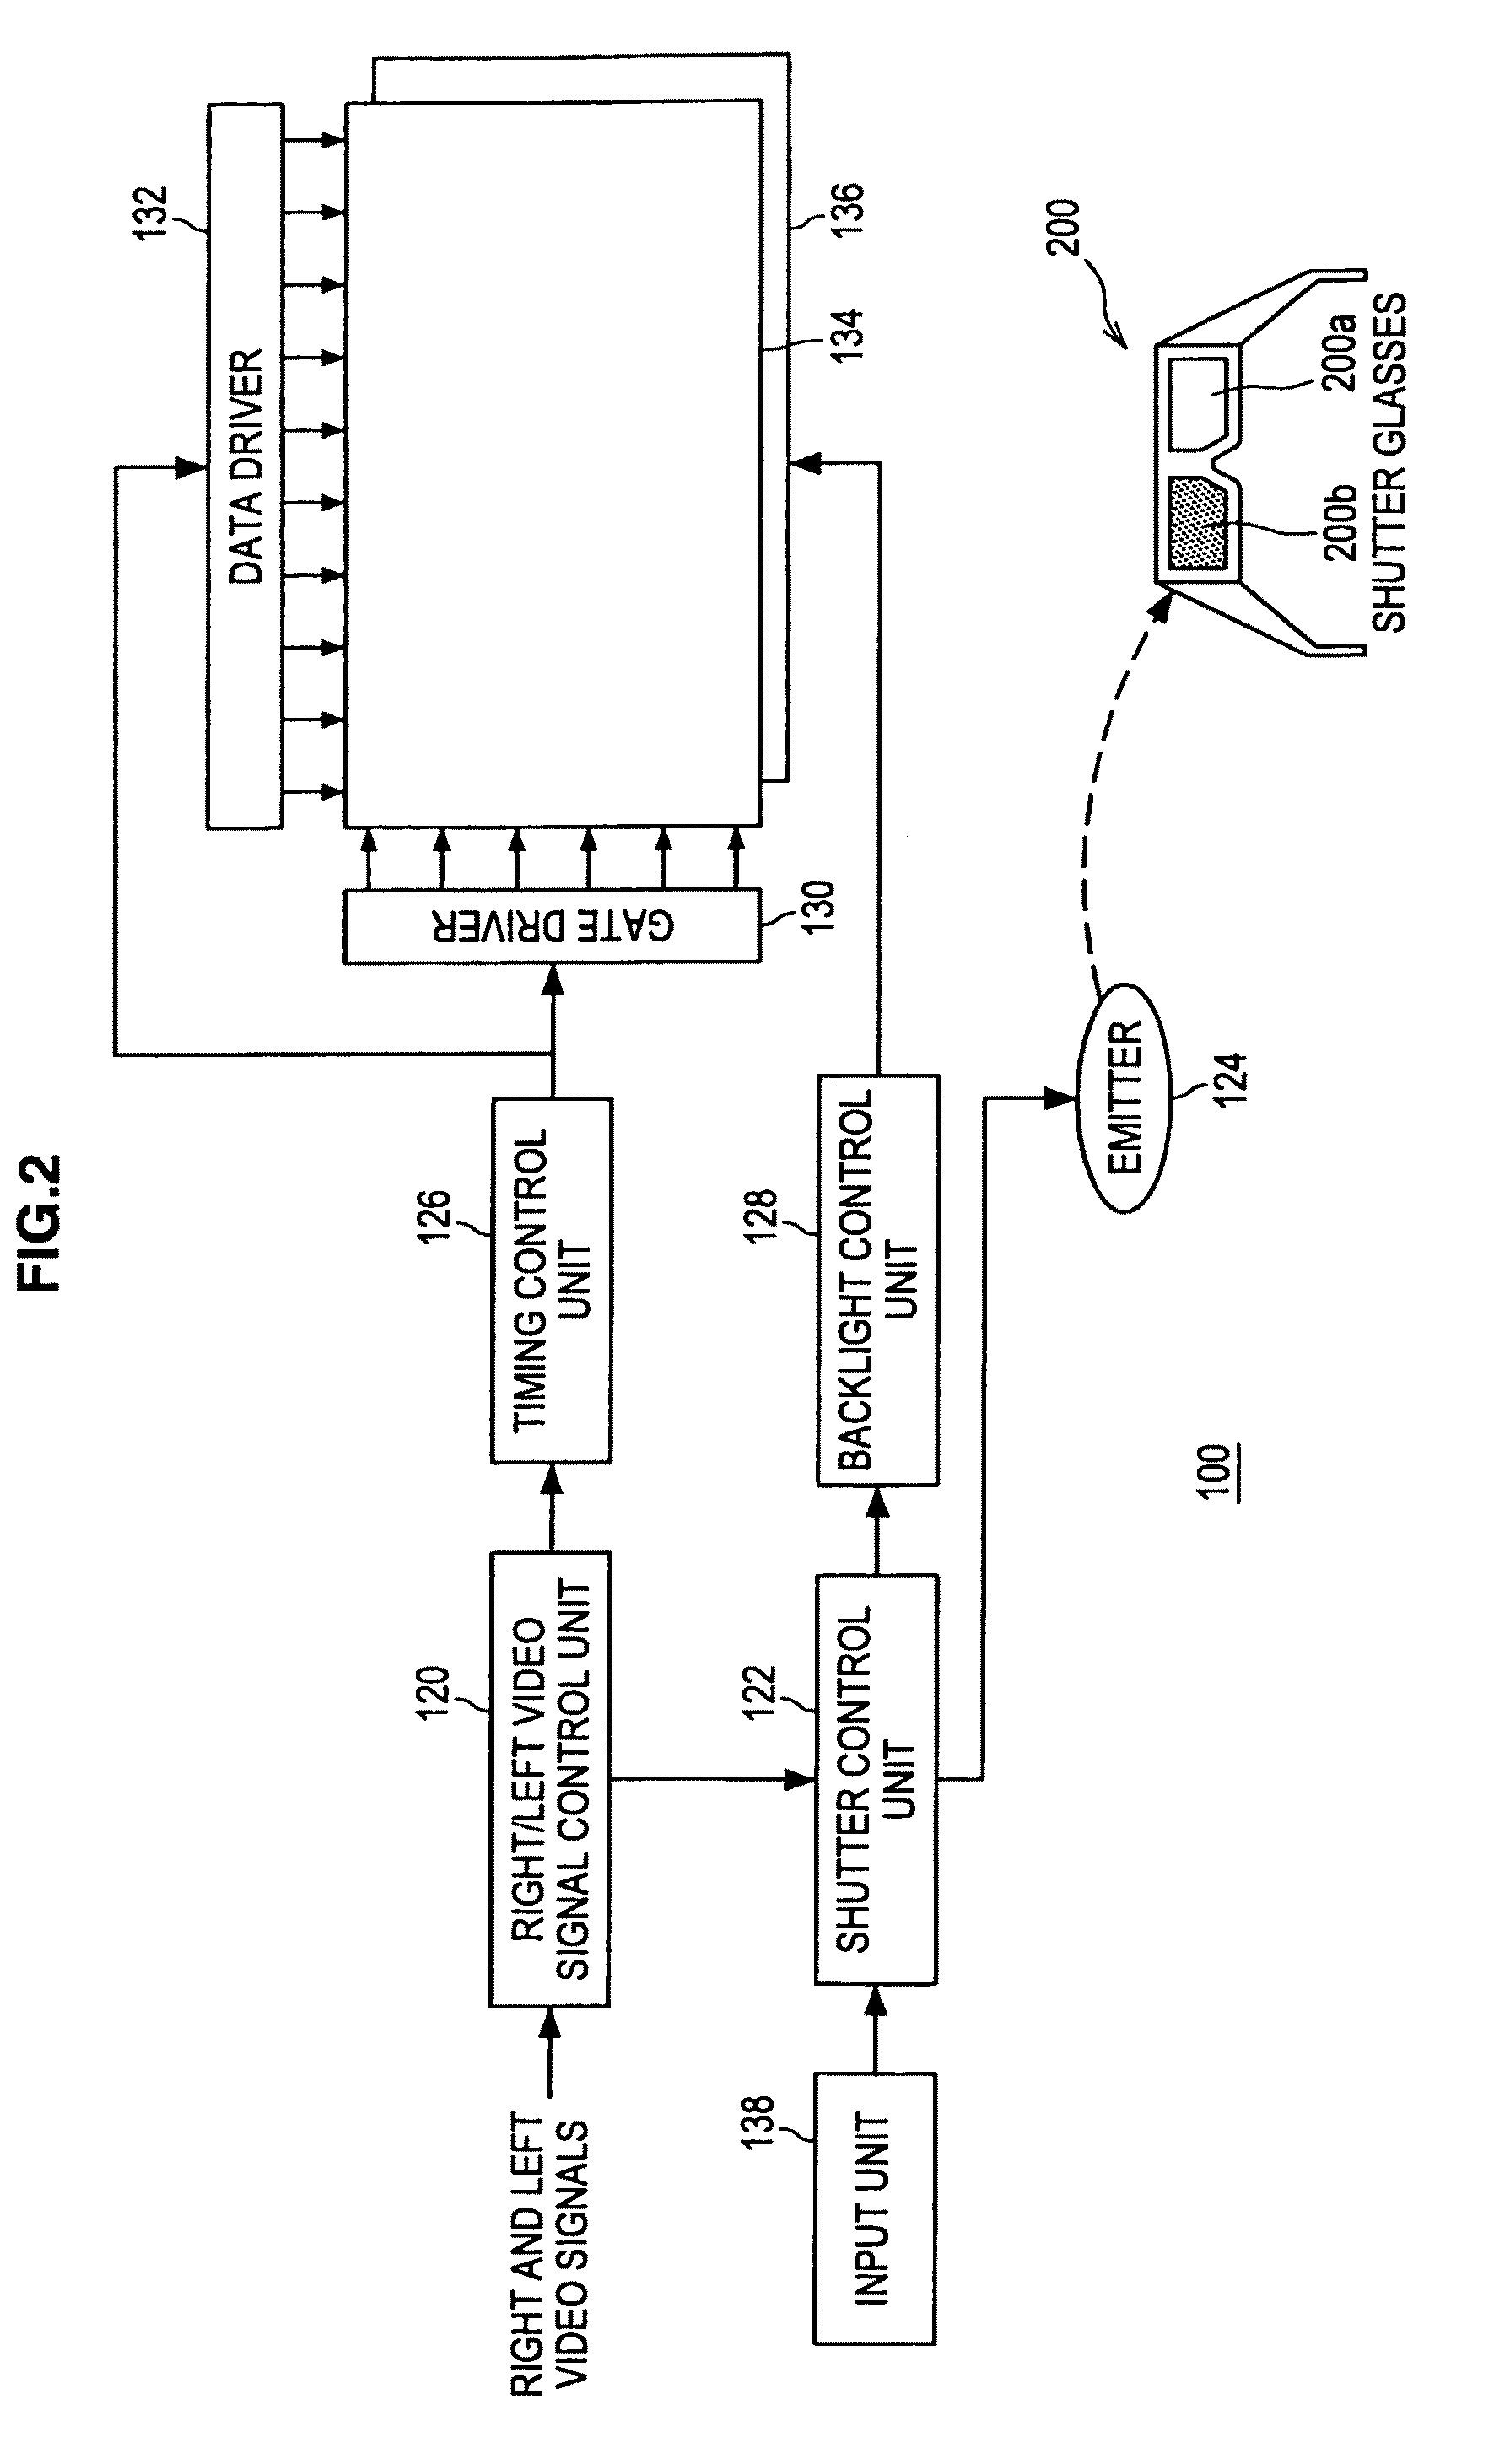 Apparatus and method for changing an open period for right and left eye shutters of a pair of viewing glasses